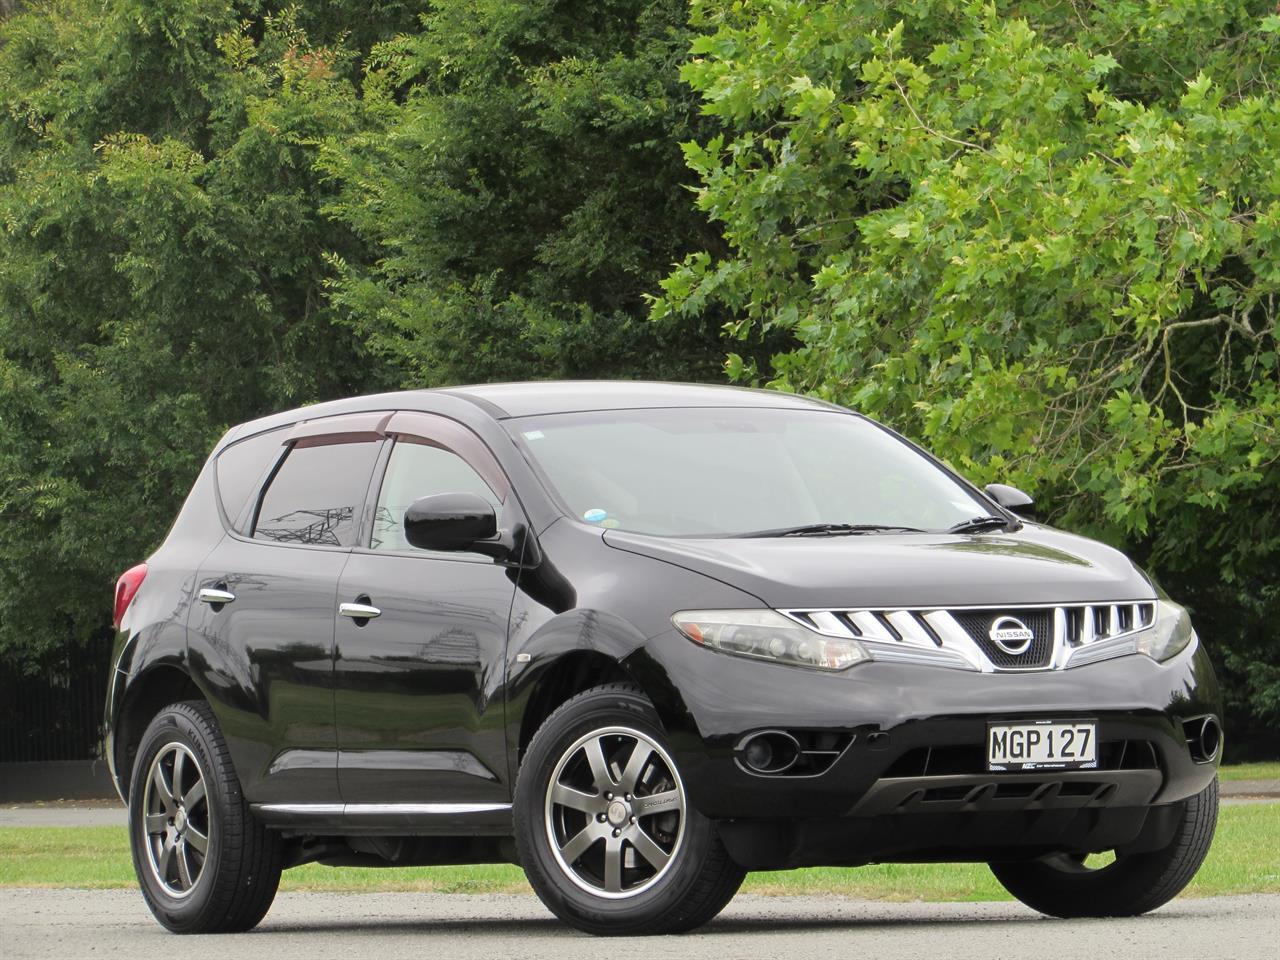 NZC best hot price for 2009 Nissan MURANO in Christchurch